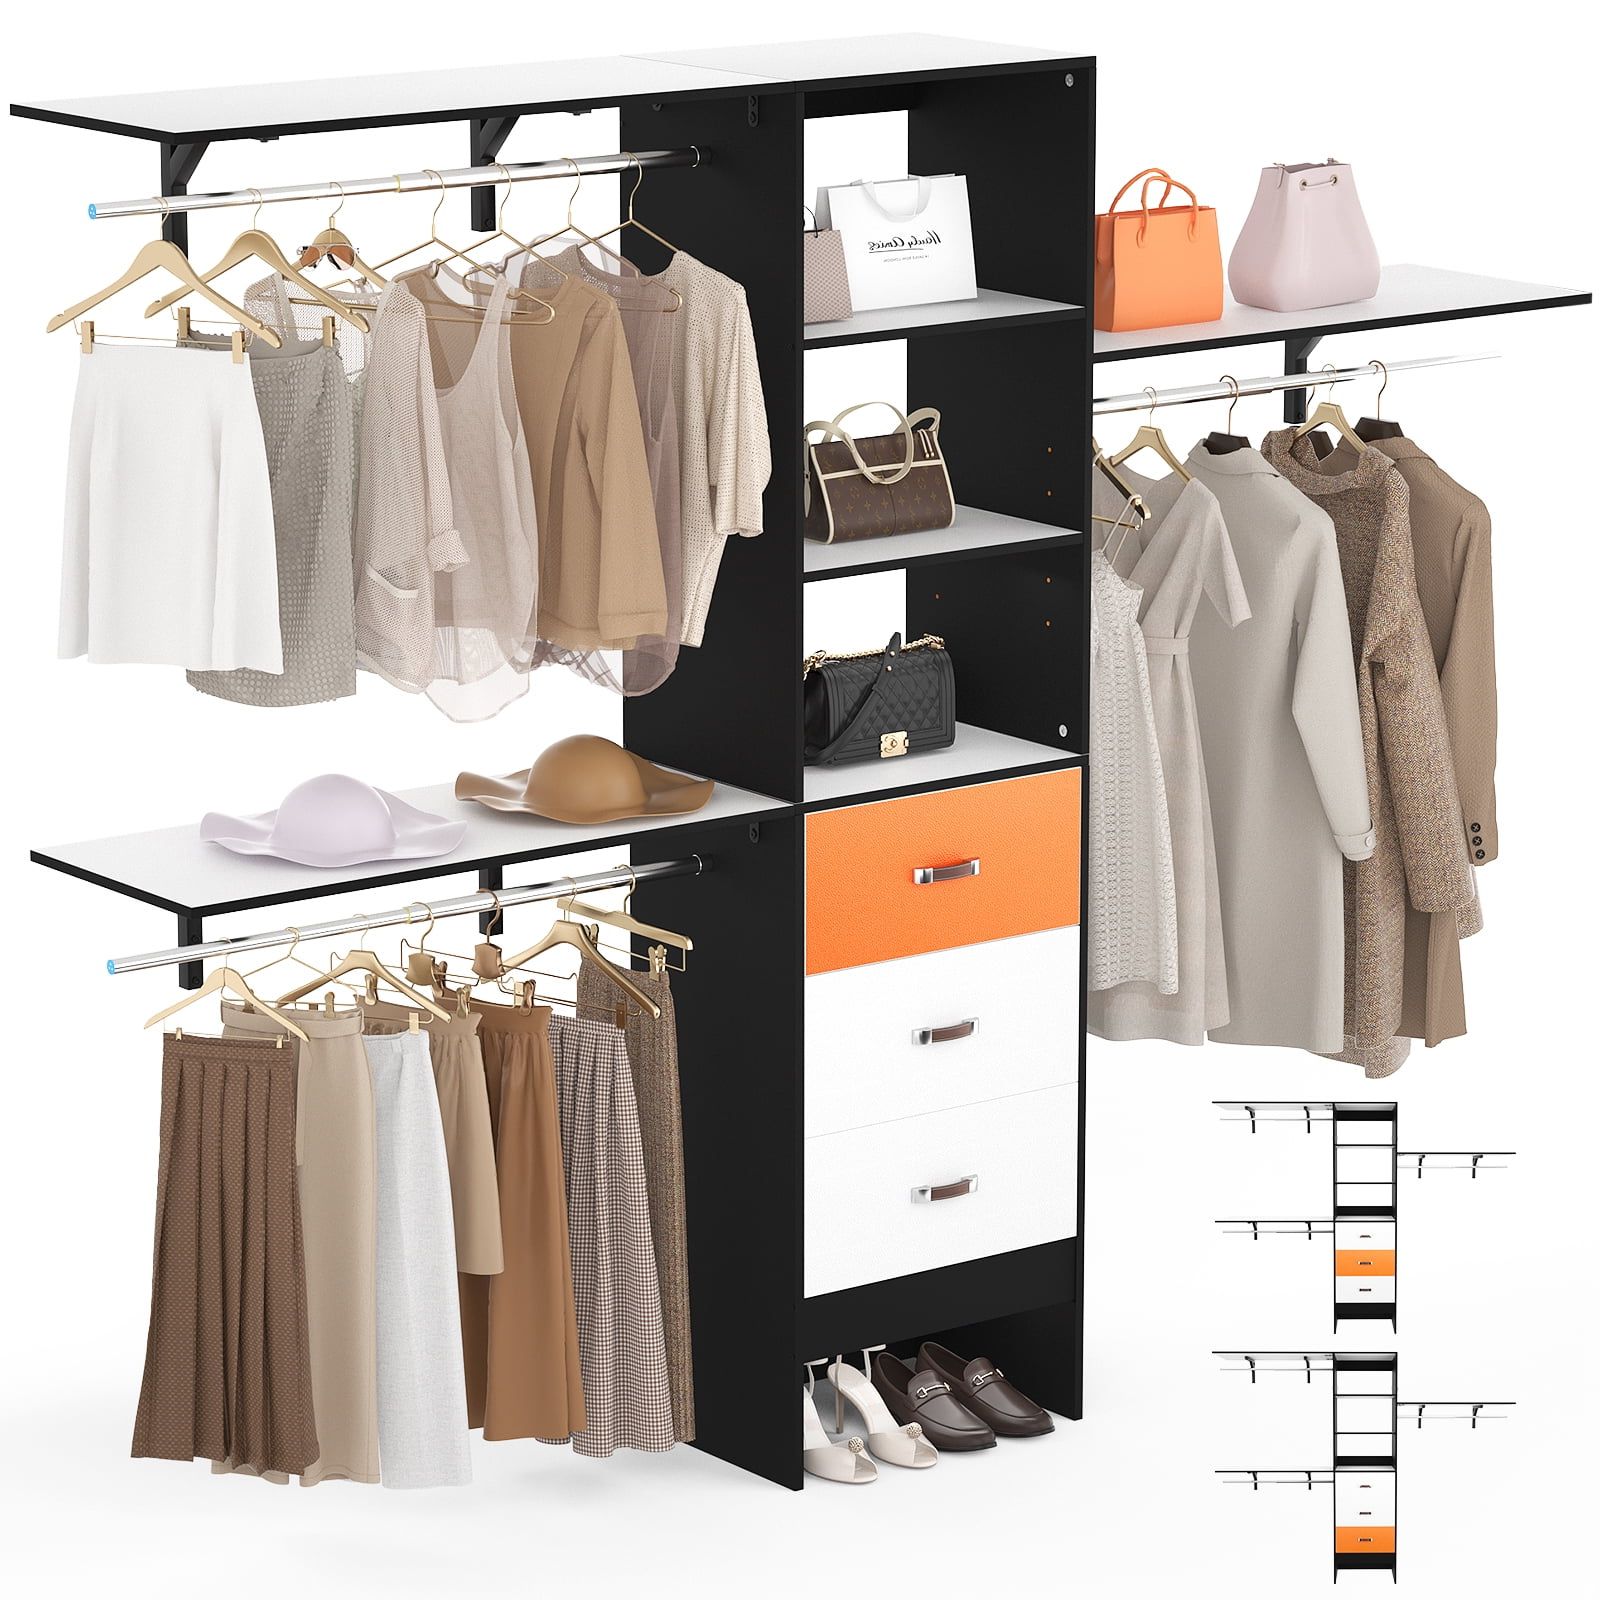 Most Recent Homieasy 96 Inches Closet System, 8ft Walk In Closet Organizer With 3  Shelving Towers, Heavy Duty Clothes Rack With 3 Drawers, Built In Garment  Rack, 96" L X 16" W X 75" H, For Wardrobes With 3 Shelving Towers (View 8 of 10)